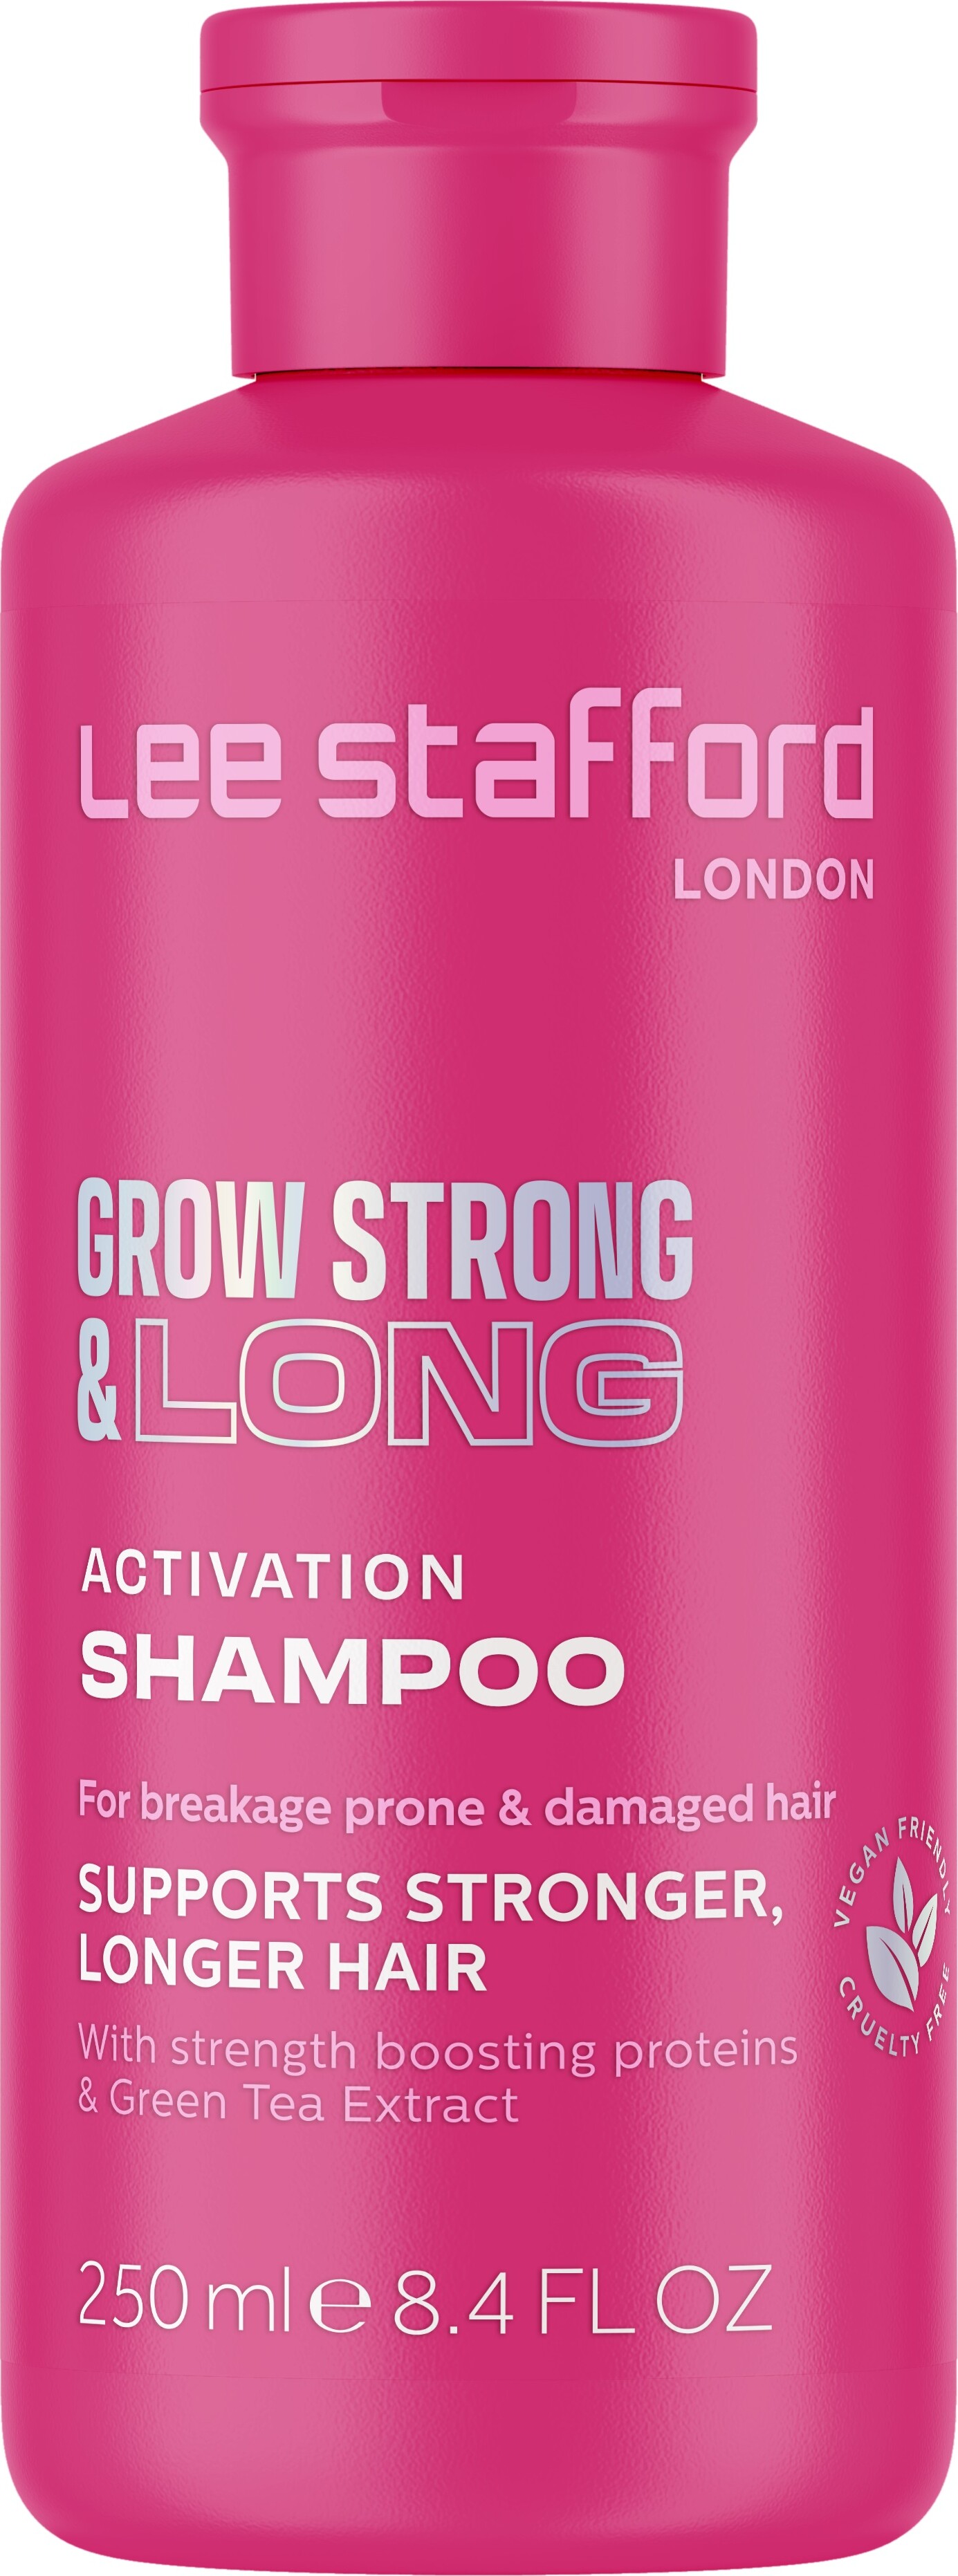 Se Lee Stafford - Grow Strong & Long Activation Shampoo - 250 Ml hos Gucca.dk